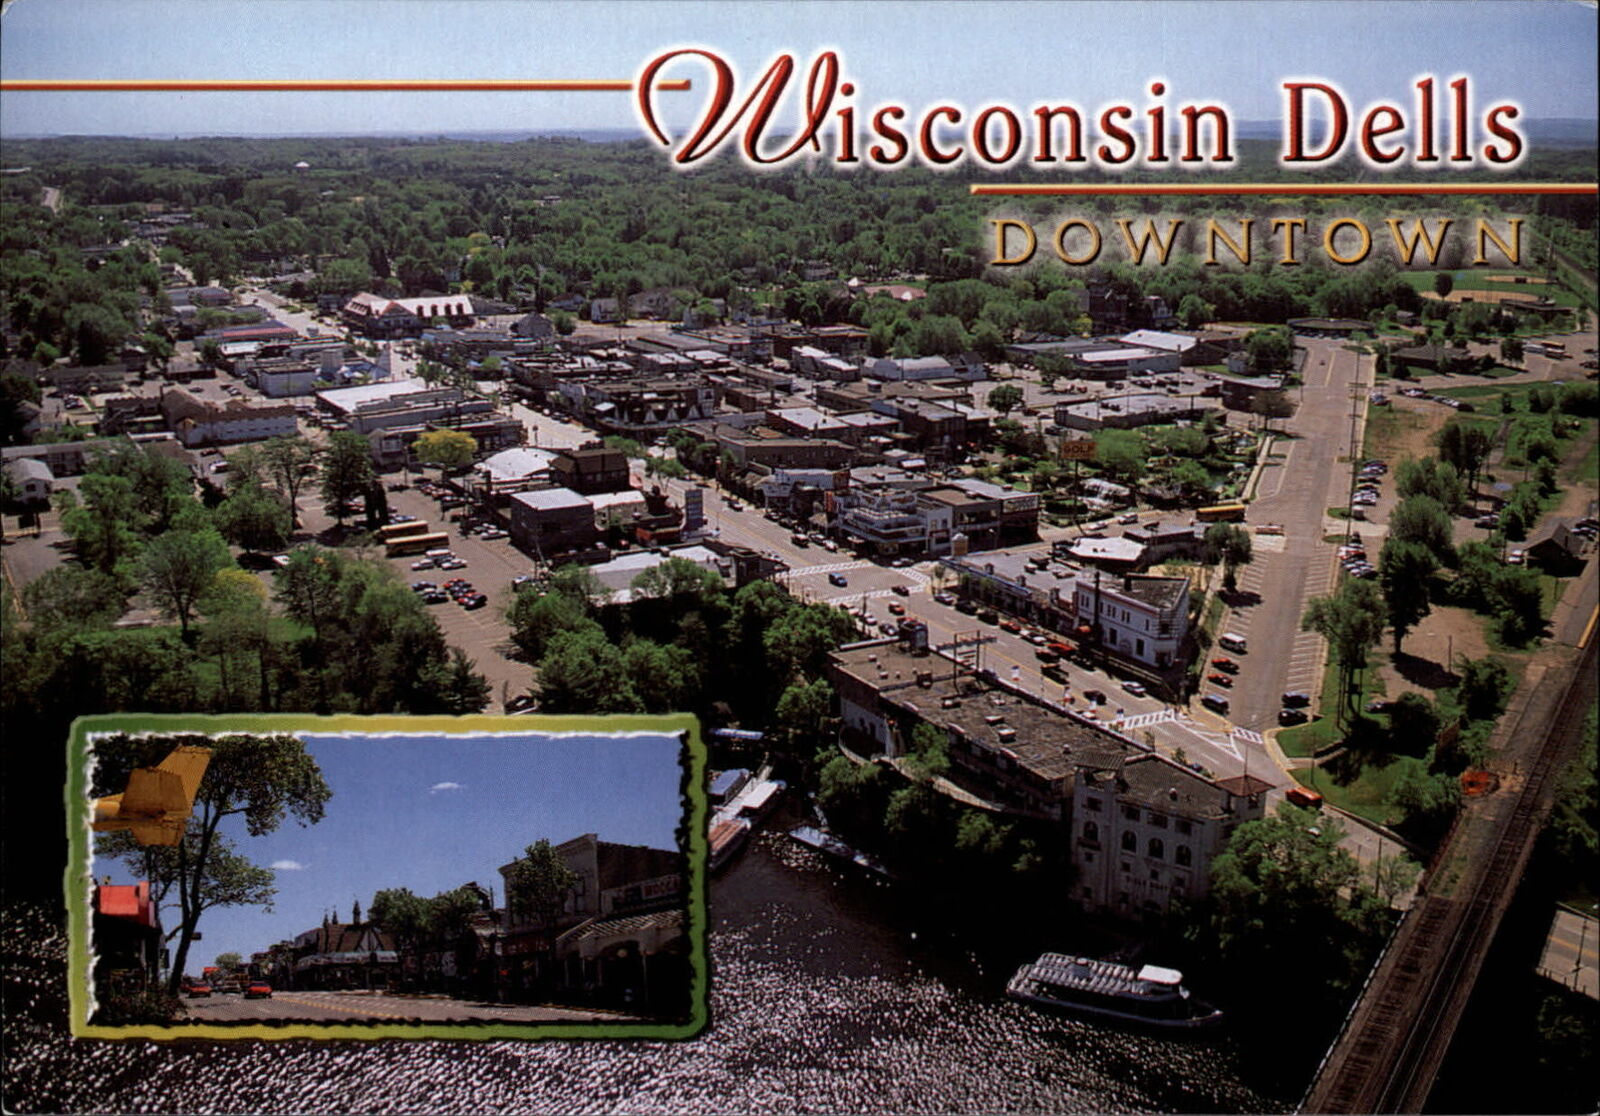 Wisconsin Dells WI downtown shopping area aerial view & inset vintage postcard